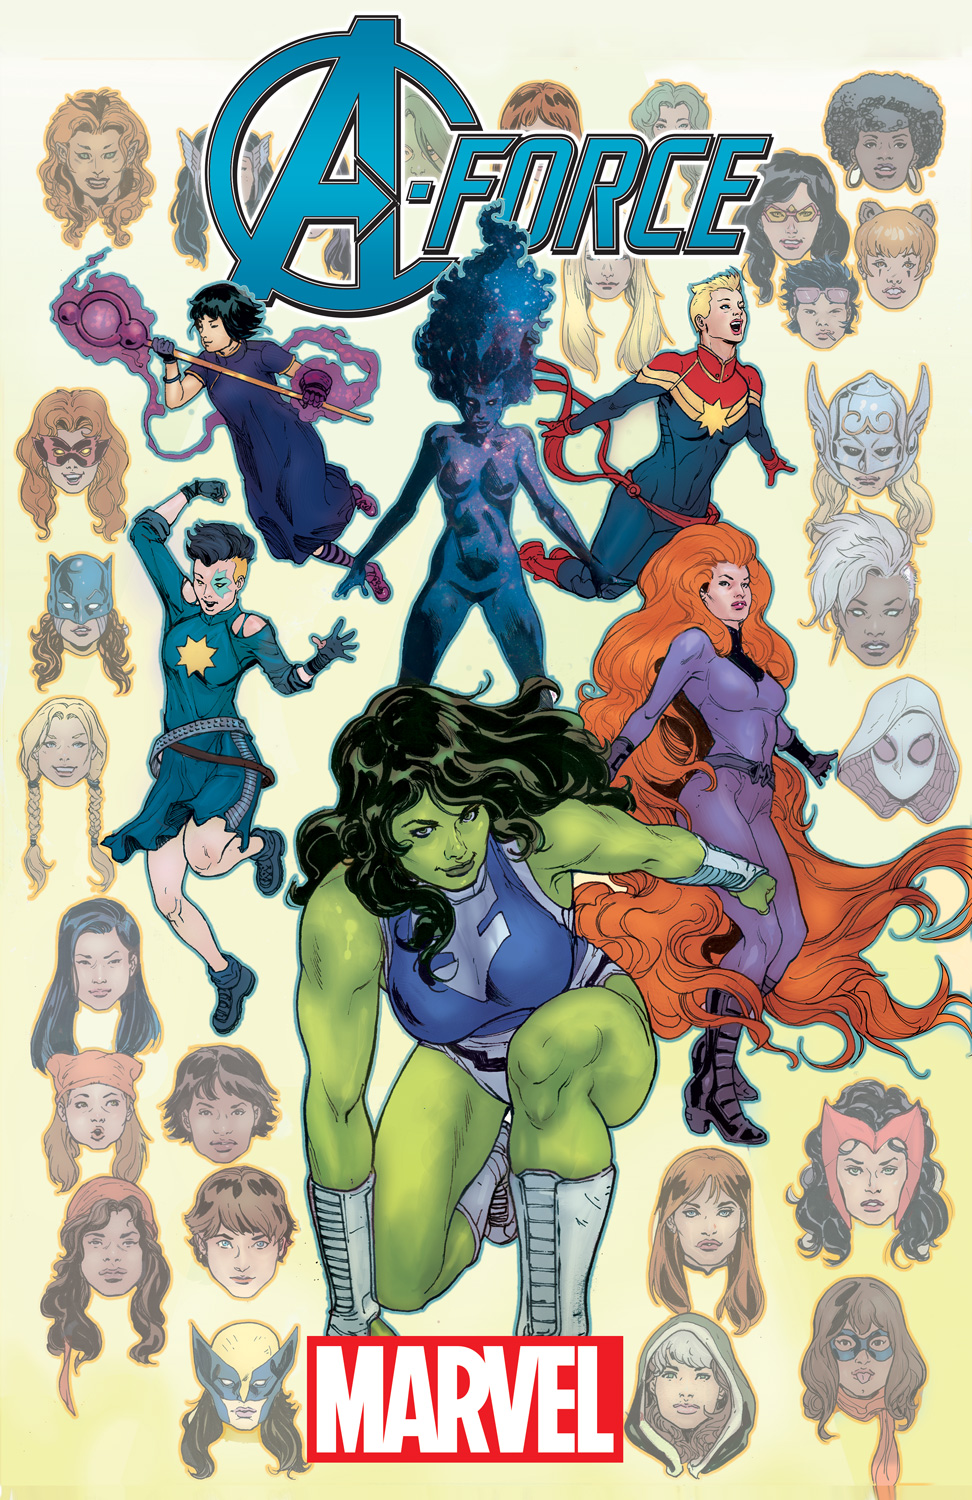 A-FORCE 1 Assembles the Women of Marvel this Fall